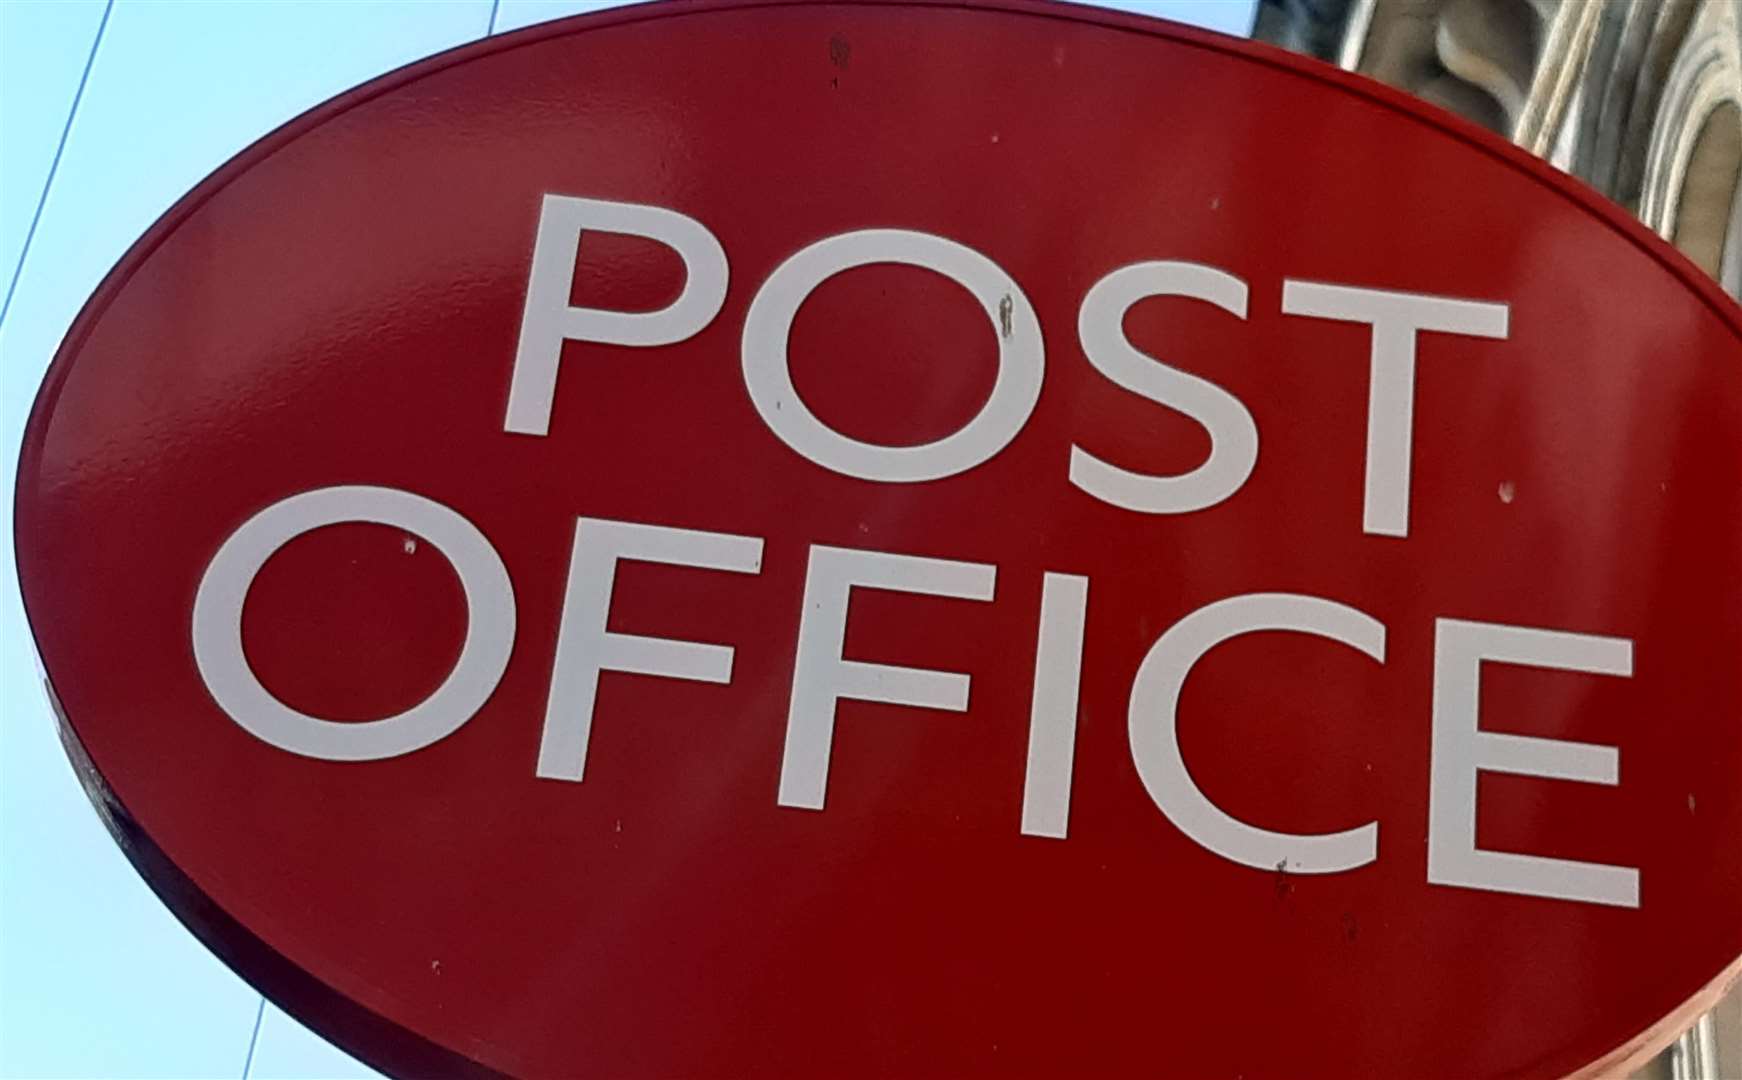 The Post Office has come in for fierce criticism of its handling of the scandal